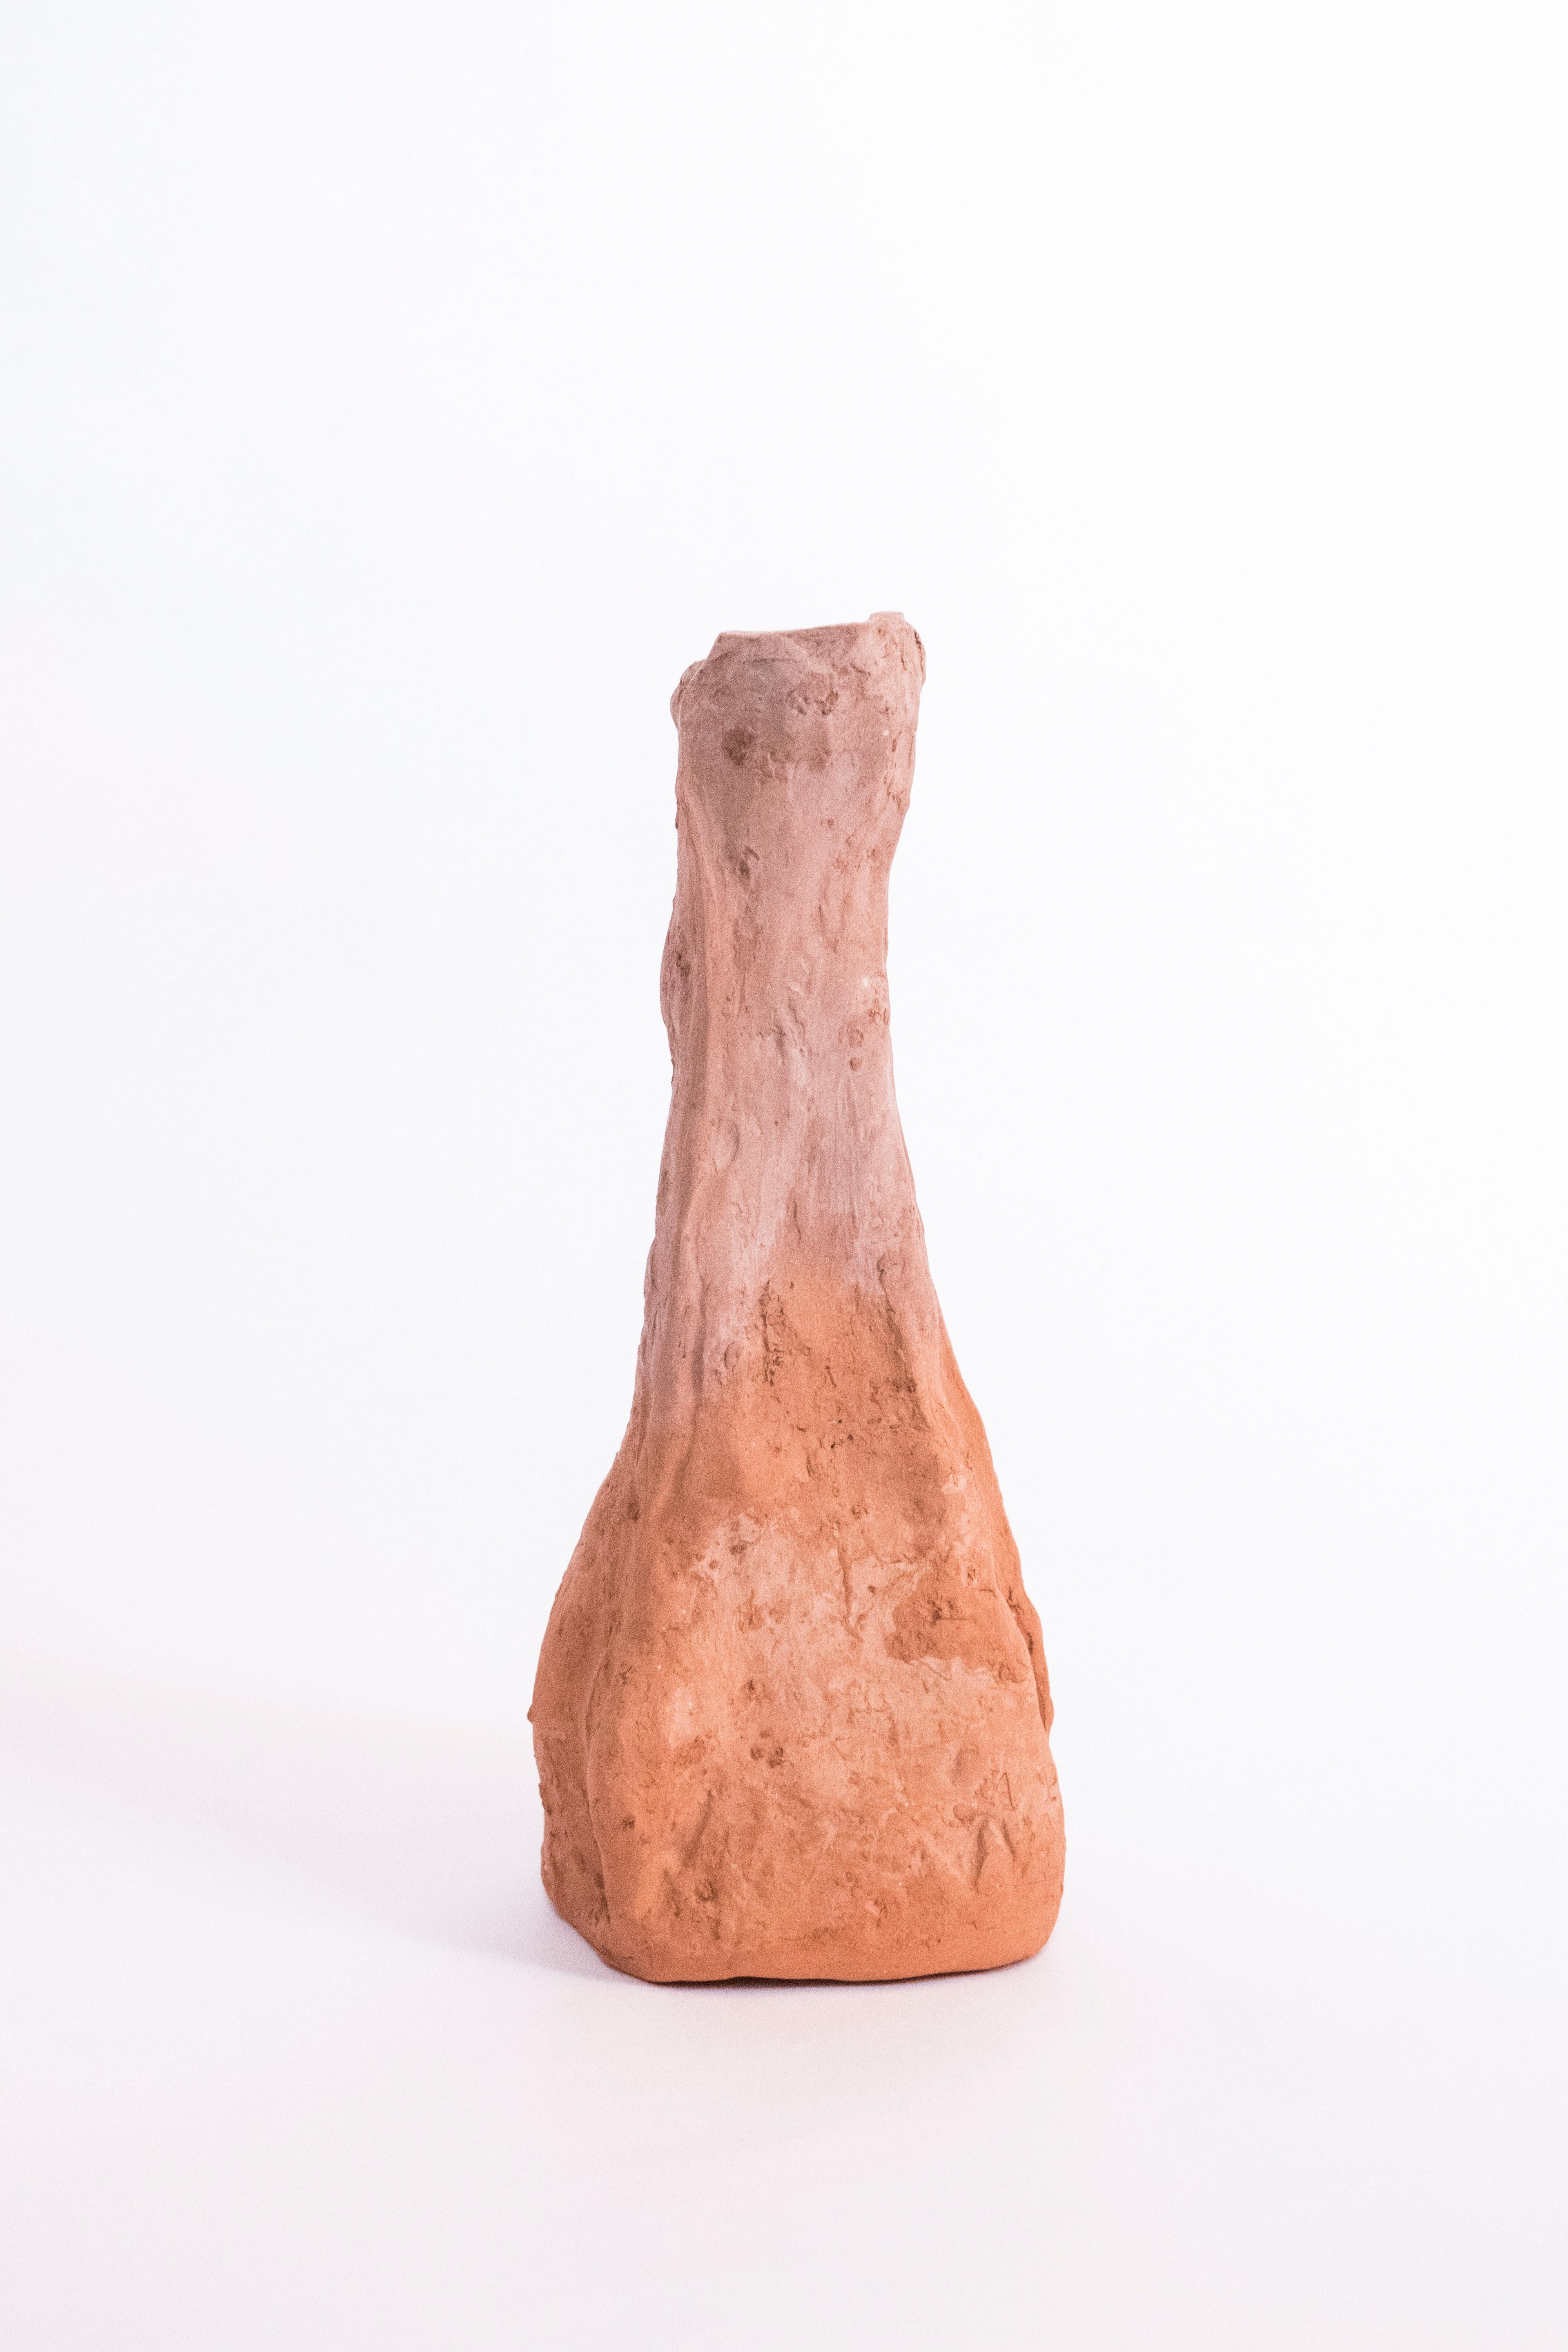 Gaïamorphism, unique organic vase, Aurore
Measures: 23 x 8 x 7.5 cm

Established in Gironde estuary, Gaïamorphism process embodies the local topography through raw available material by using ancestral ceramic techniques. Gaïamorphism draws here